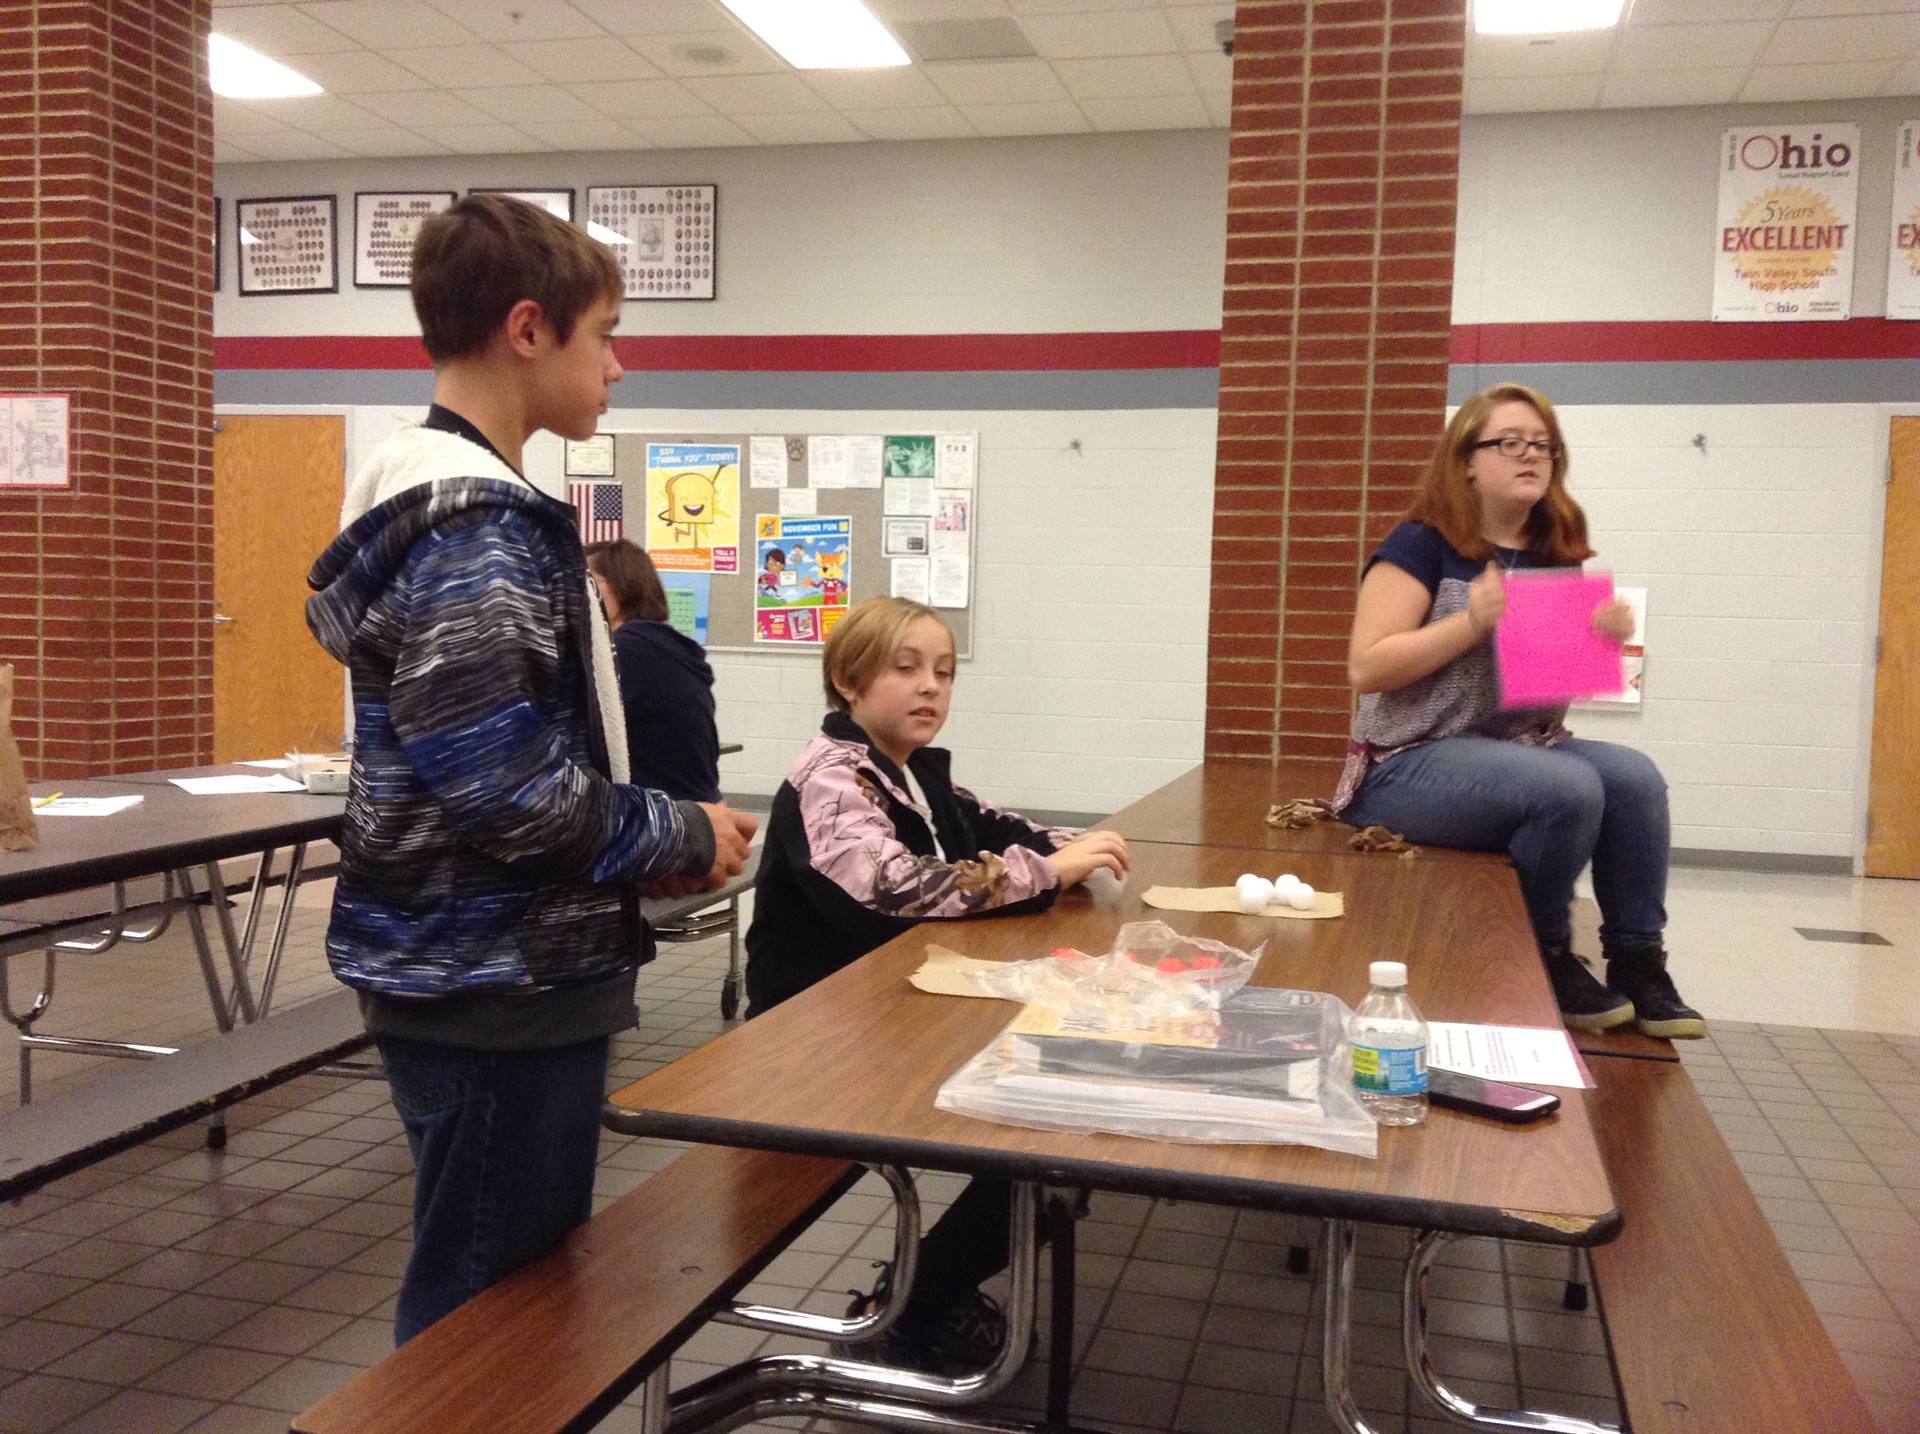 Mrs. Ackerman's students share energy activities with visiting families.